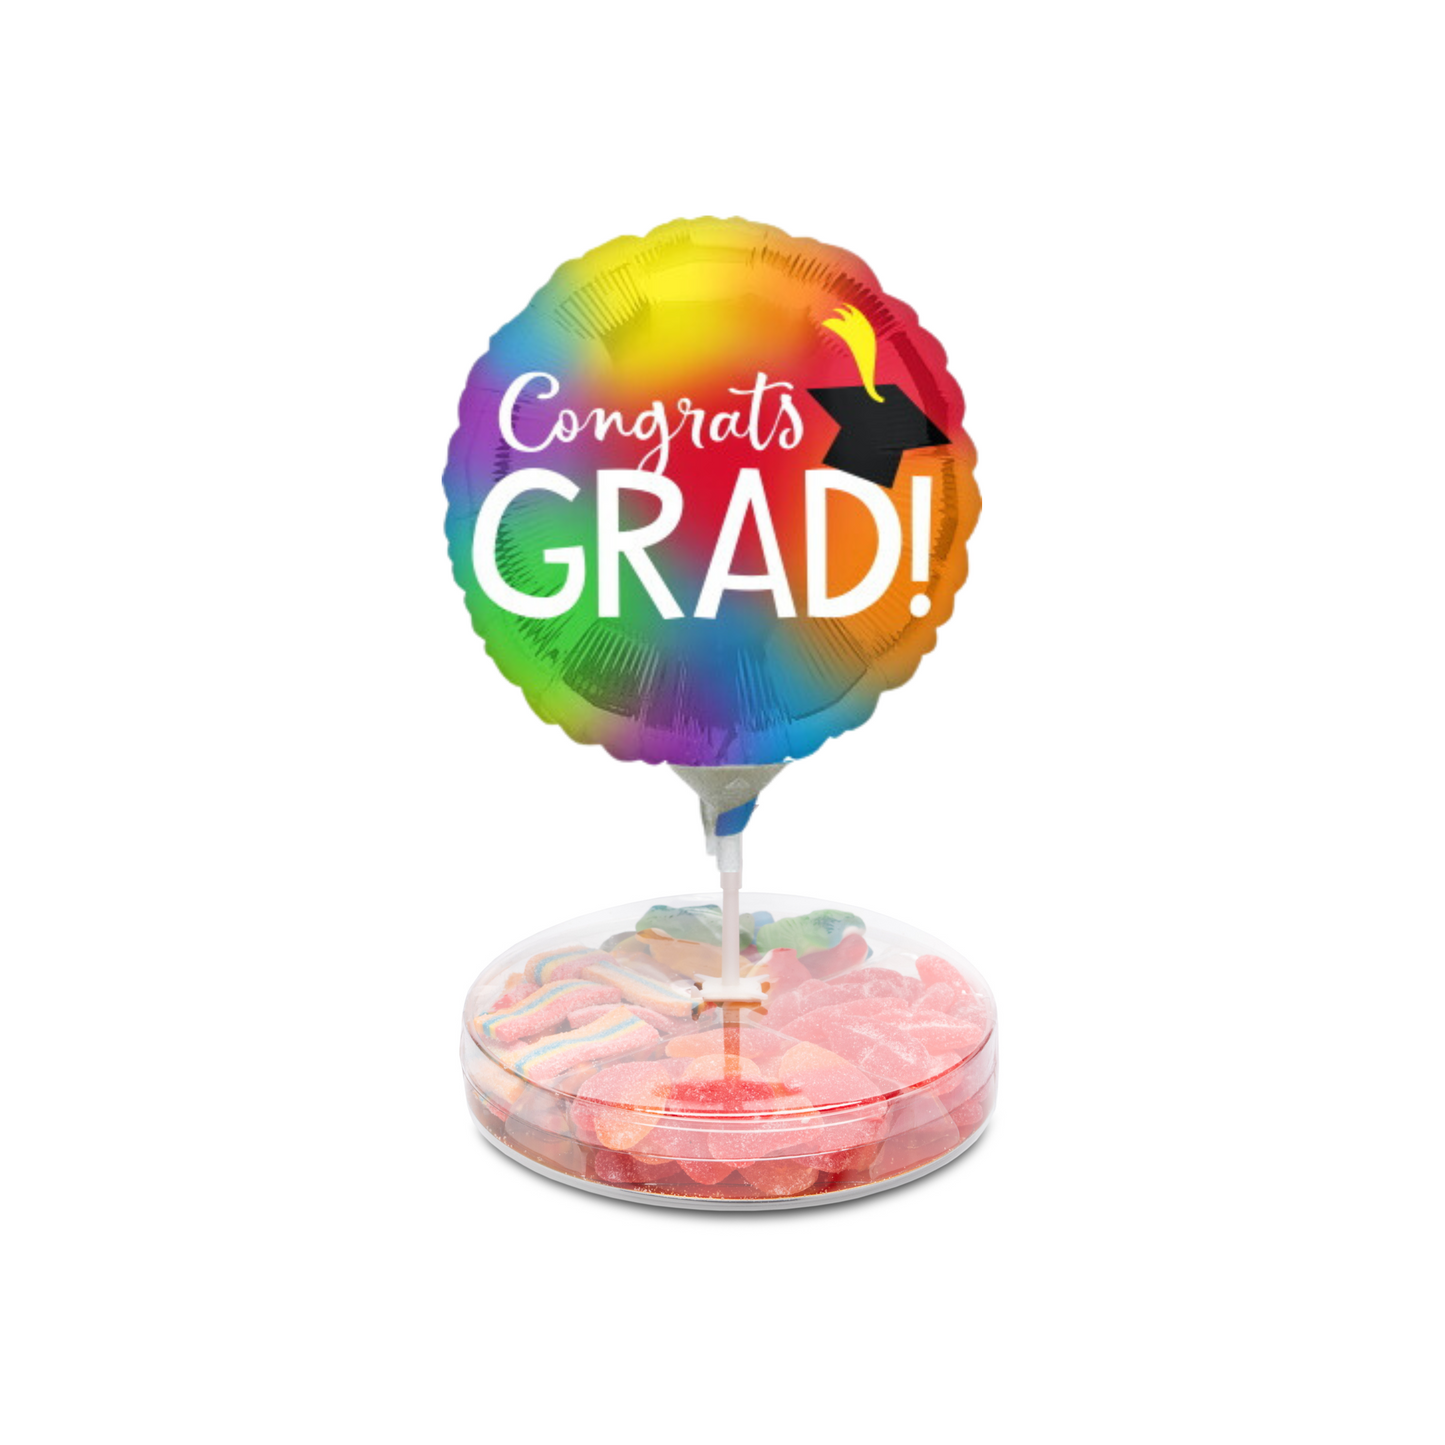 4 Section with Graduation Balloon